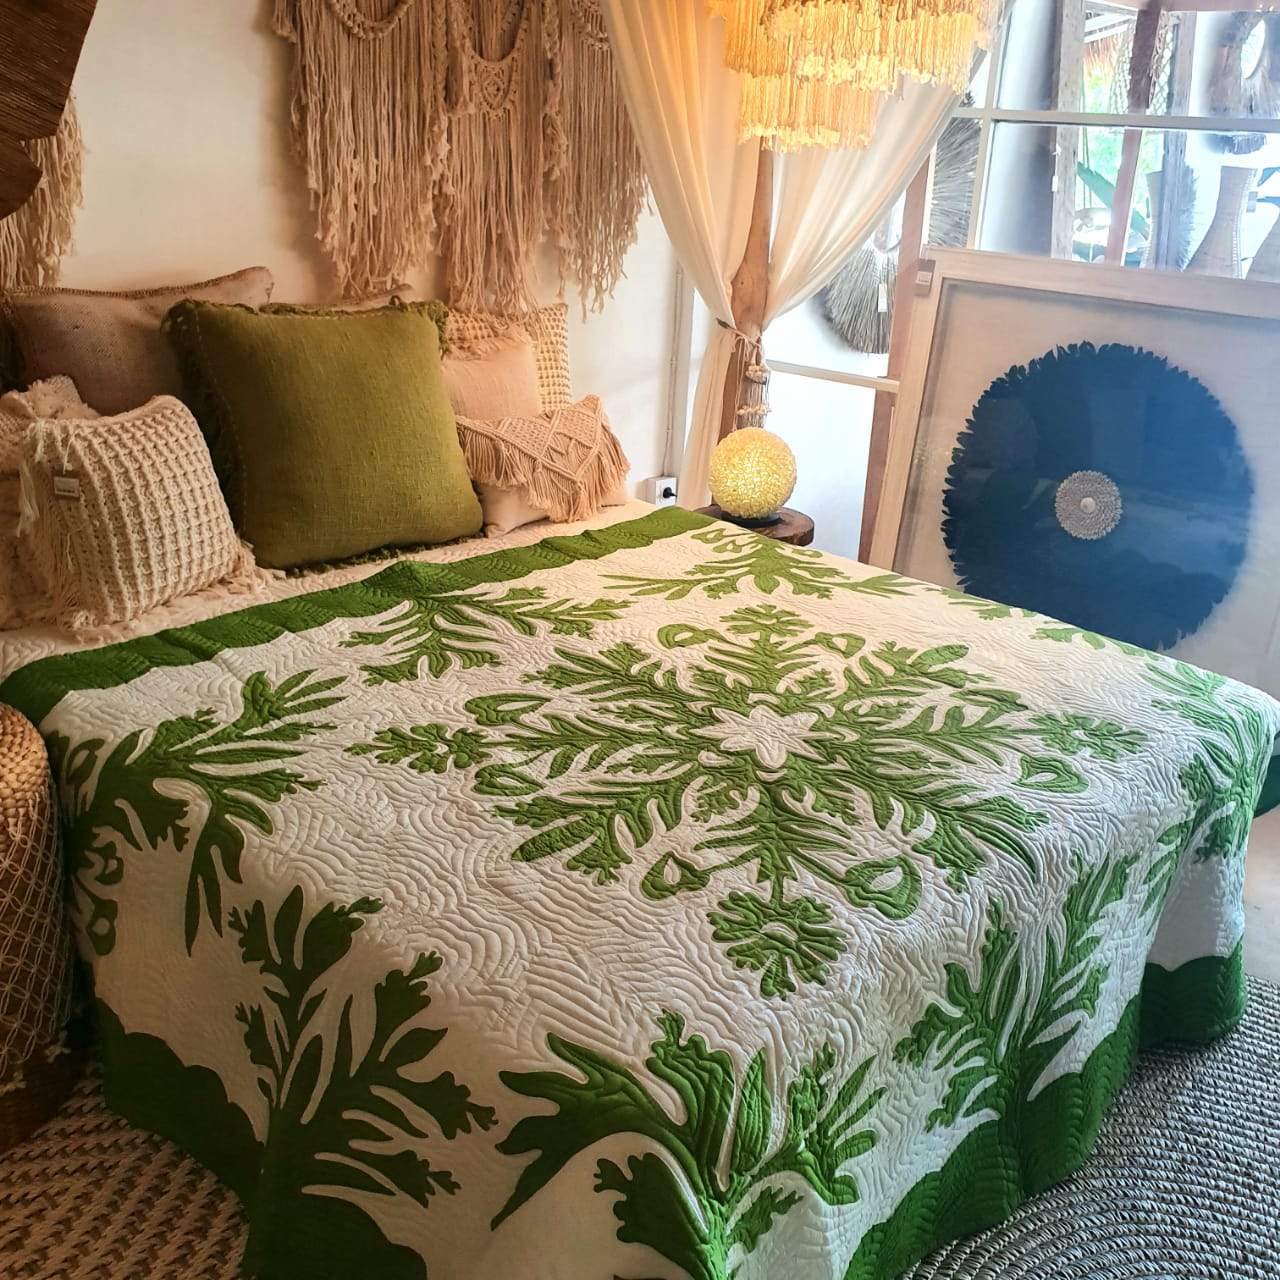 Hand Stitched Tropical Quilt Green - bohemian-beach-house